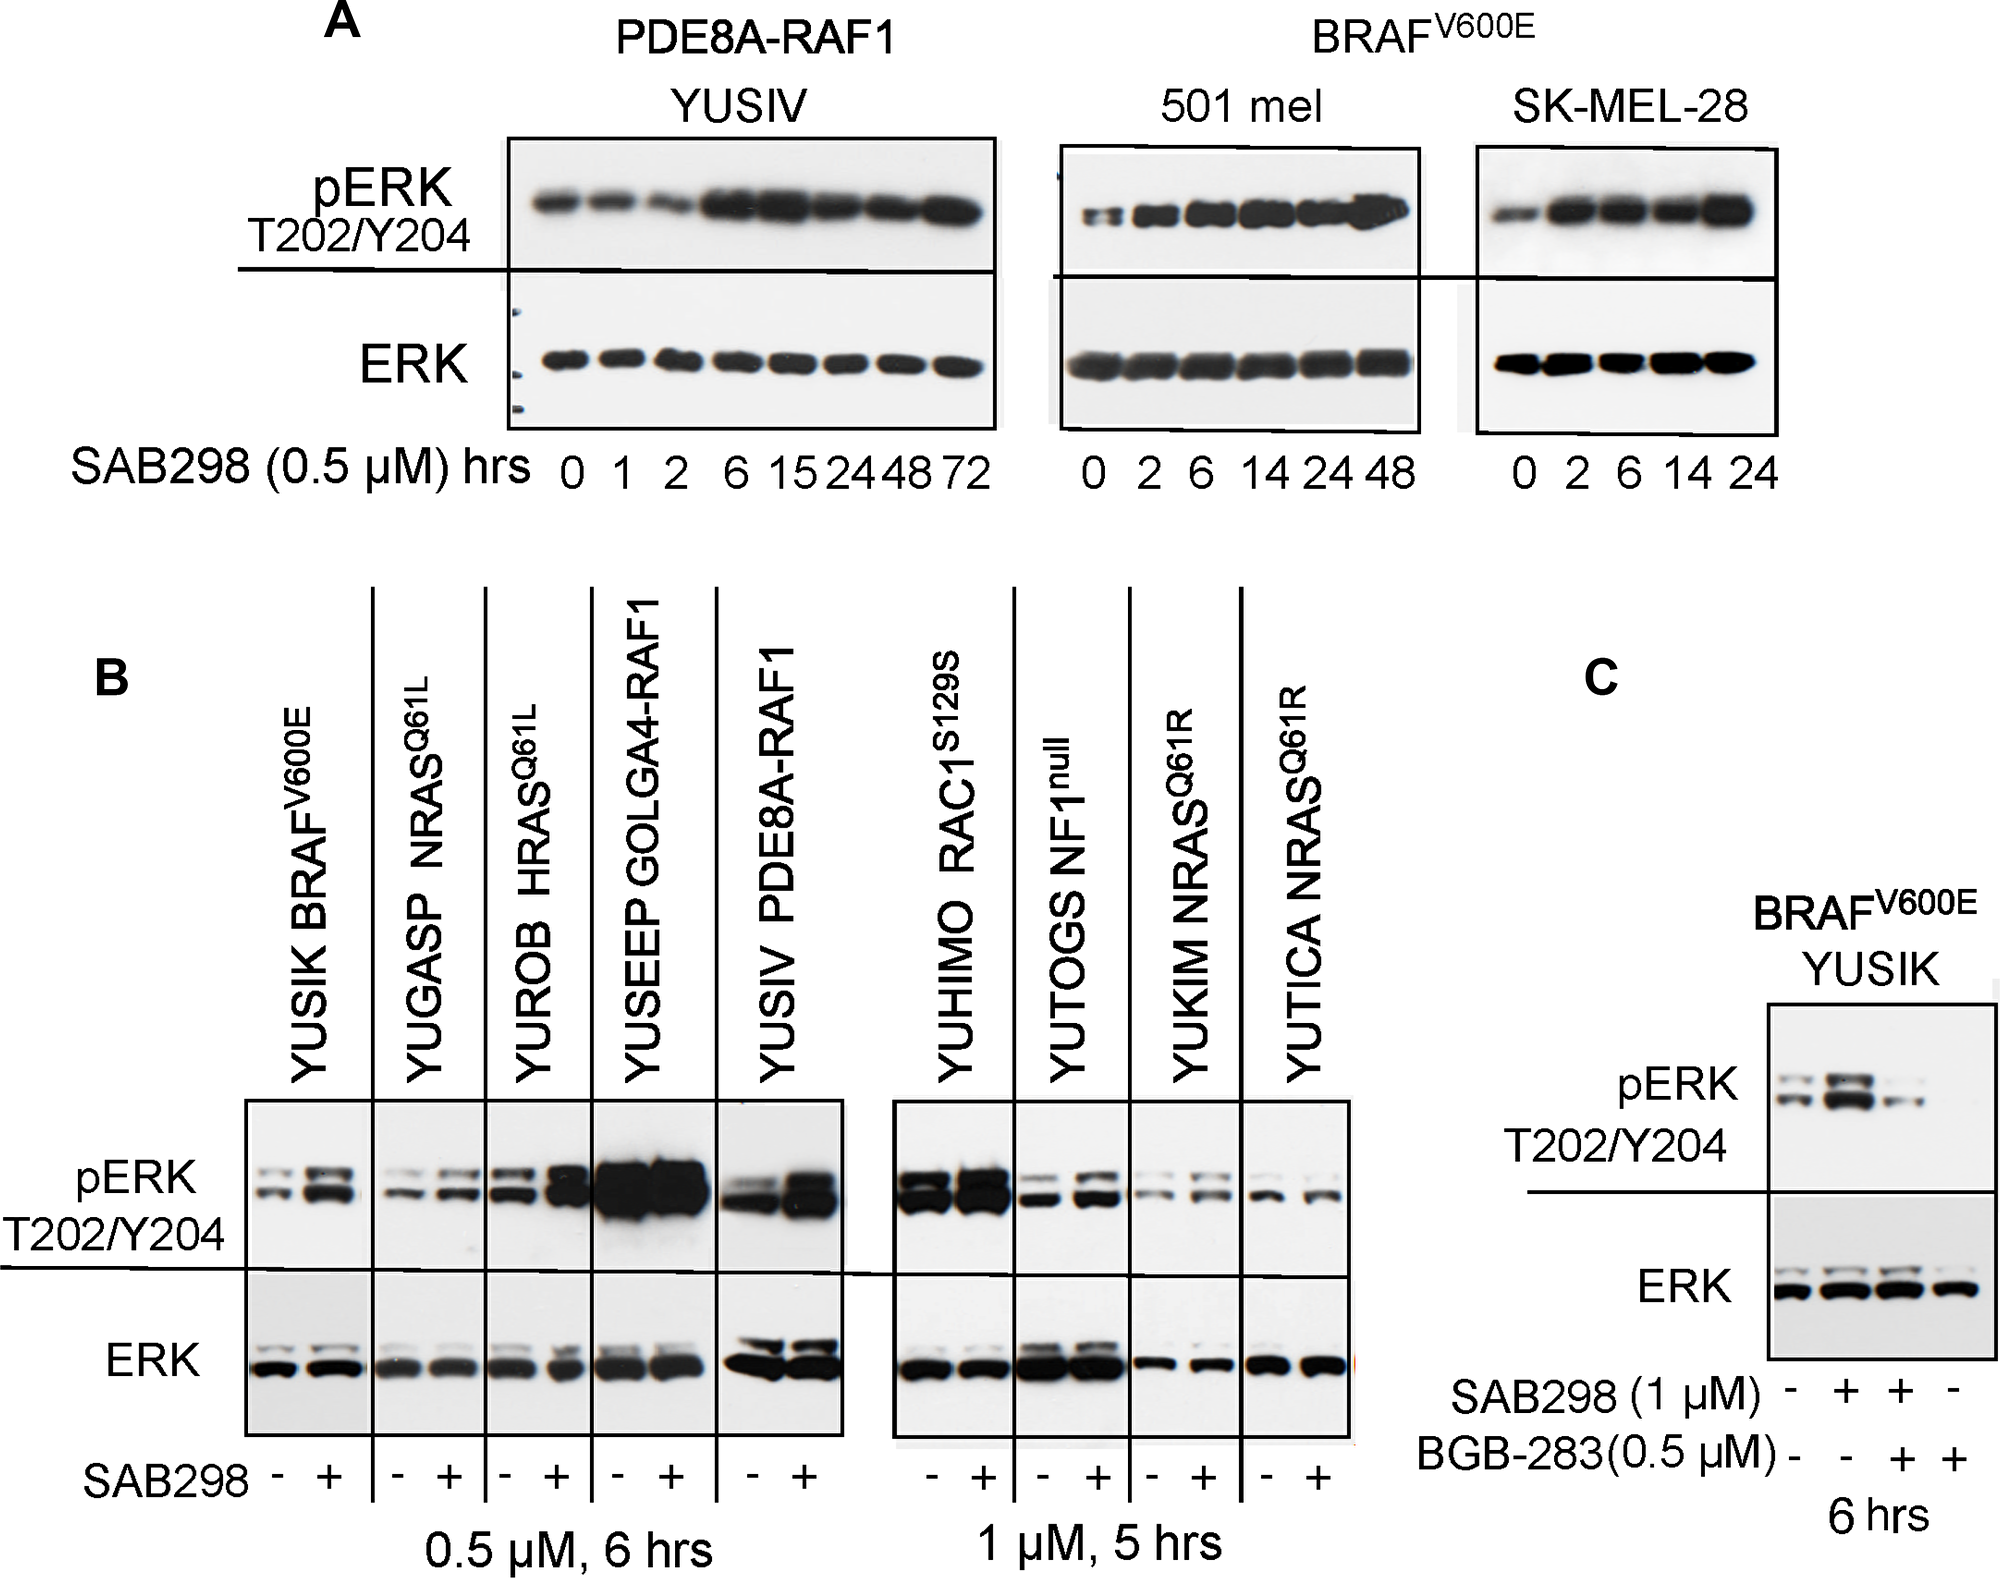 MAPK signaling is activated in response to SAB298.